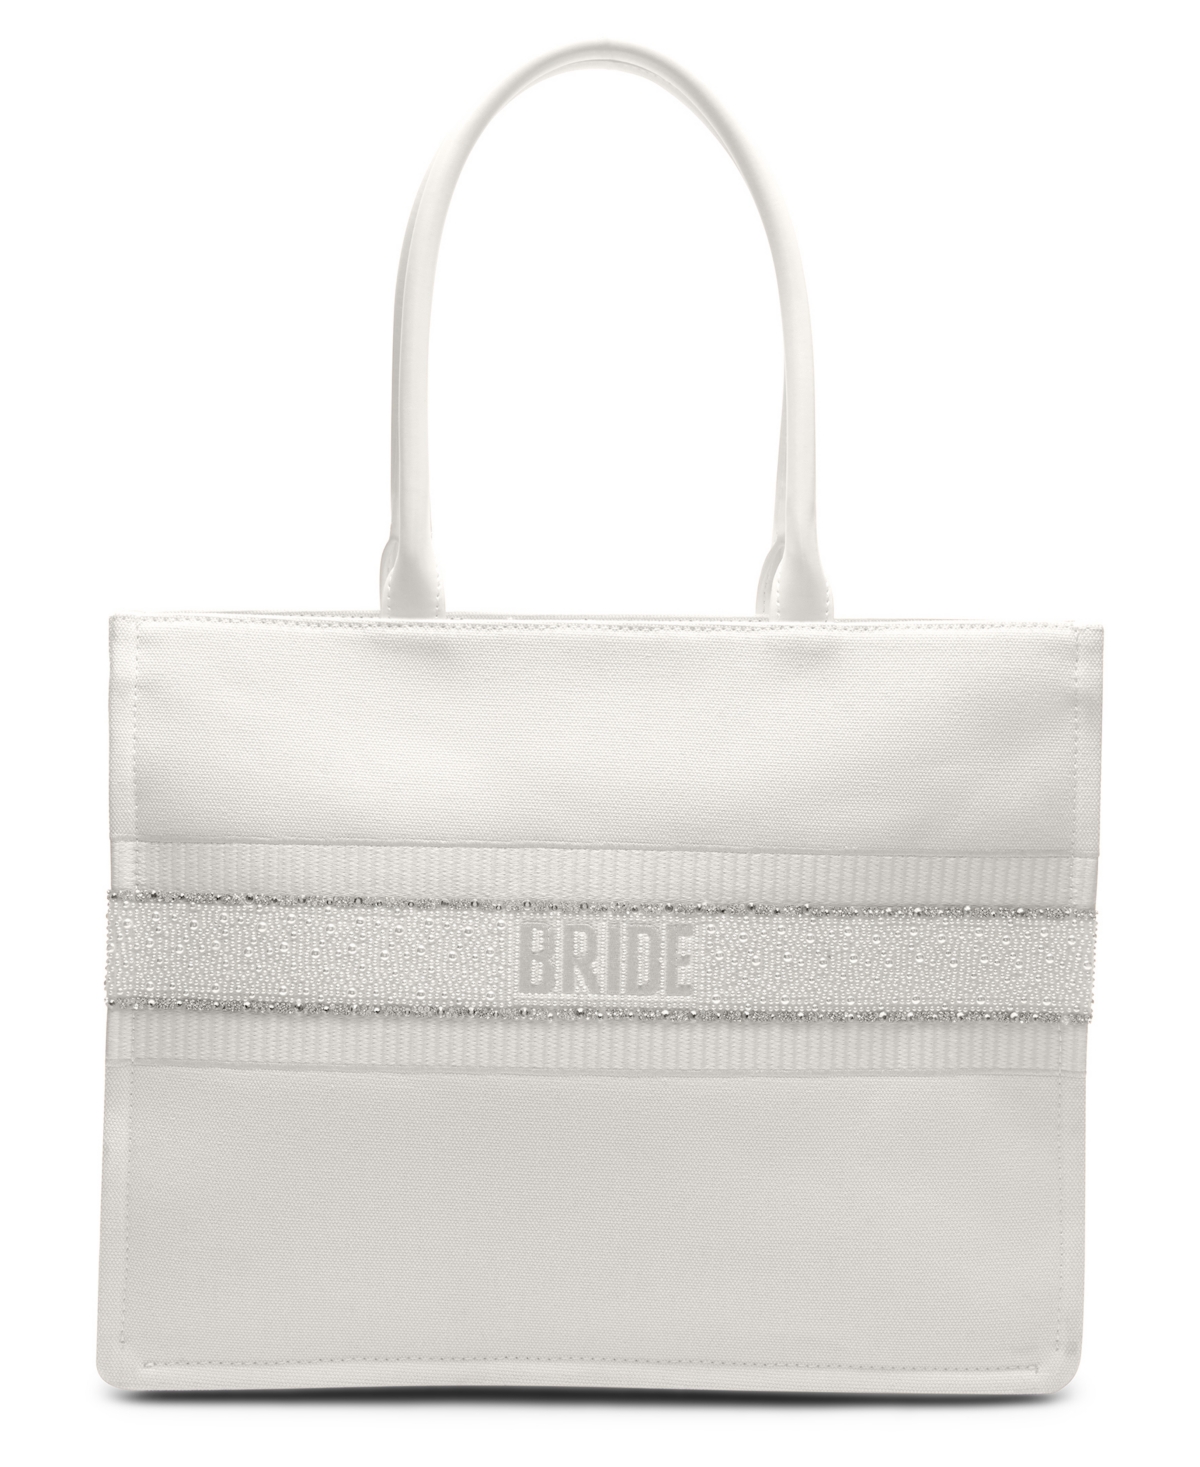 Betsey Johnson Bride Fabric Tote In White